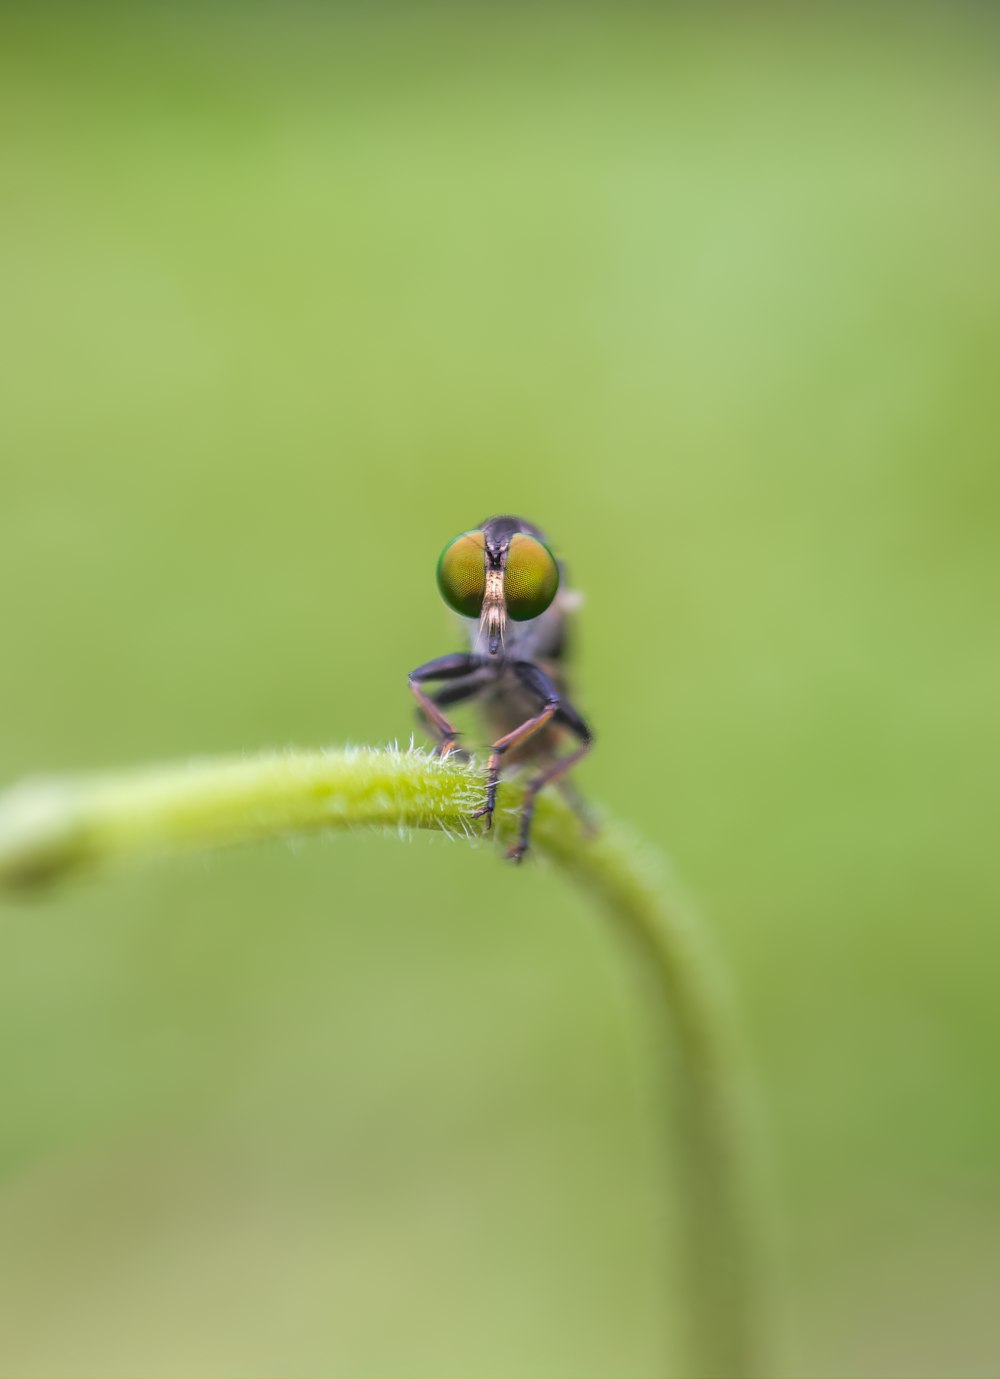 a close up of a small insect on a plant